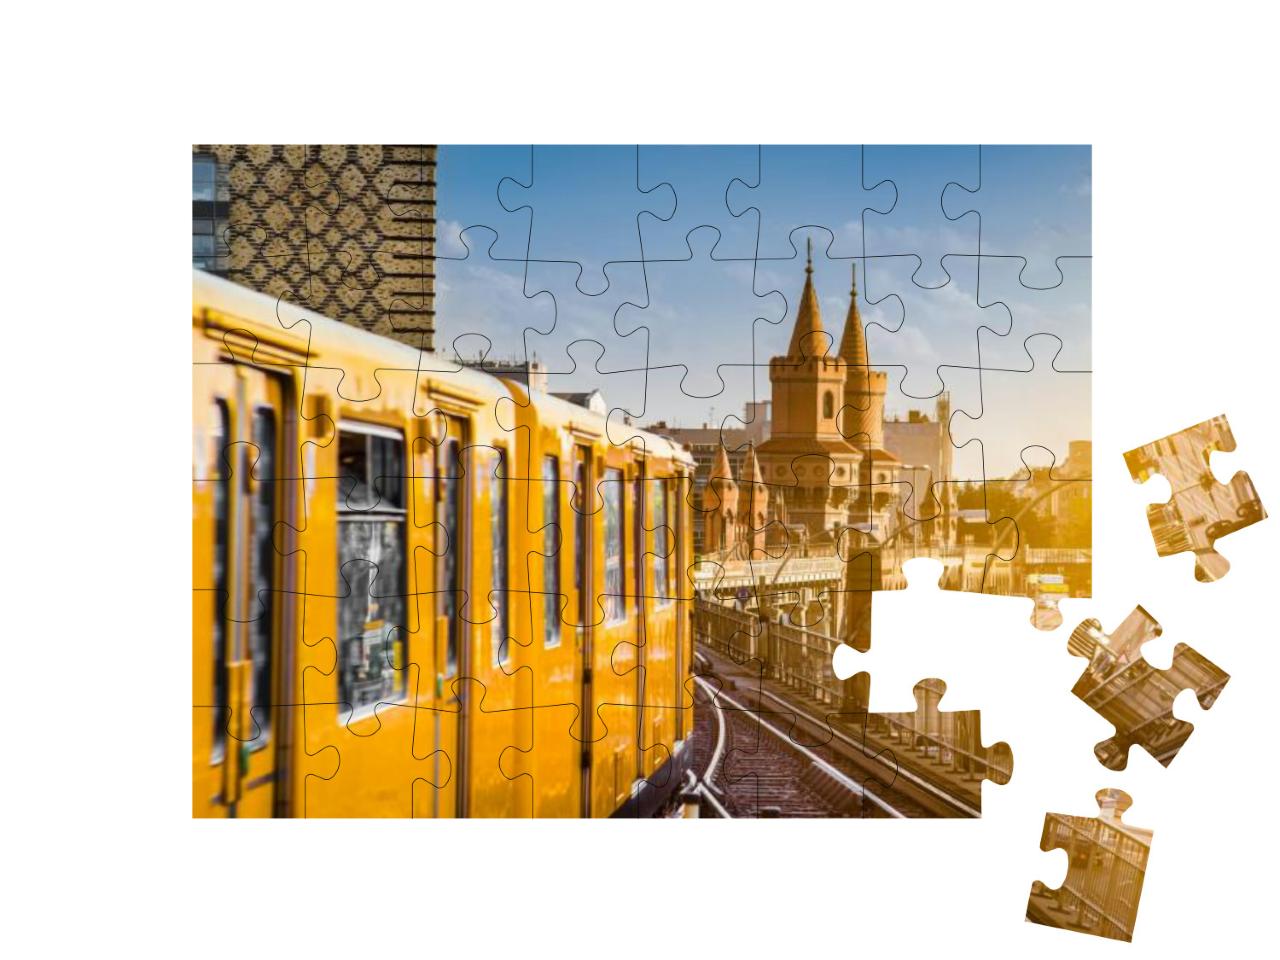 Panoramic View of Berliner U-Bahn with Oberbaum Bridge in... Jigsaw Puzzle with 48 pieces